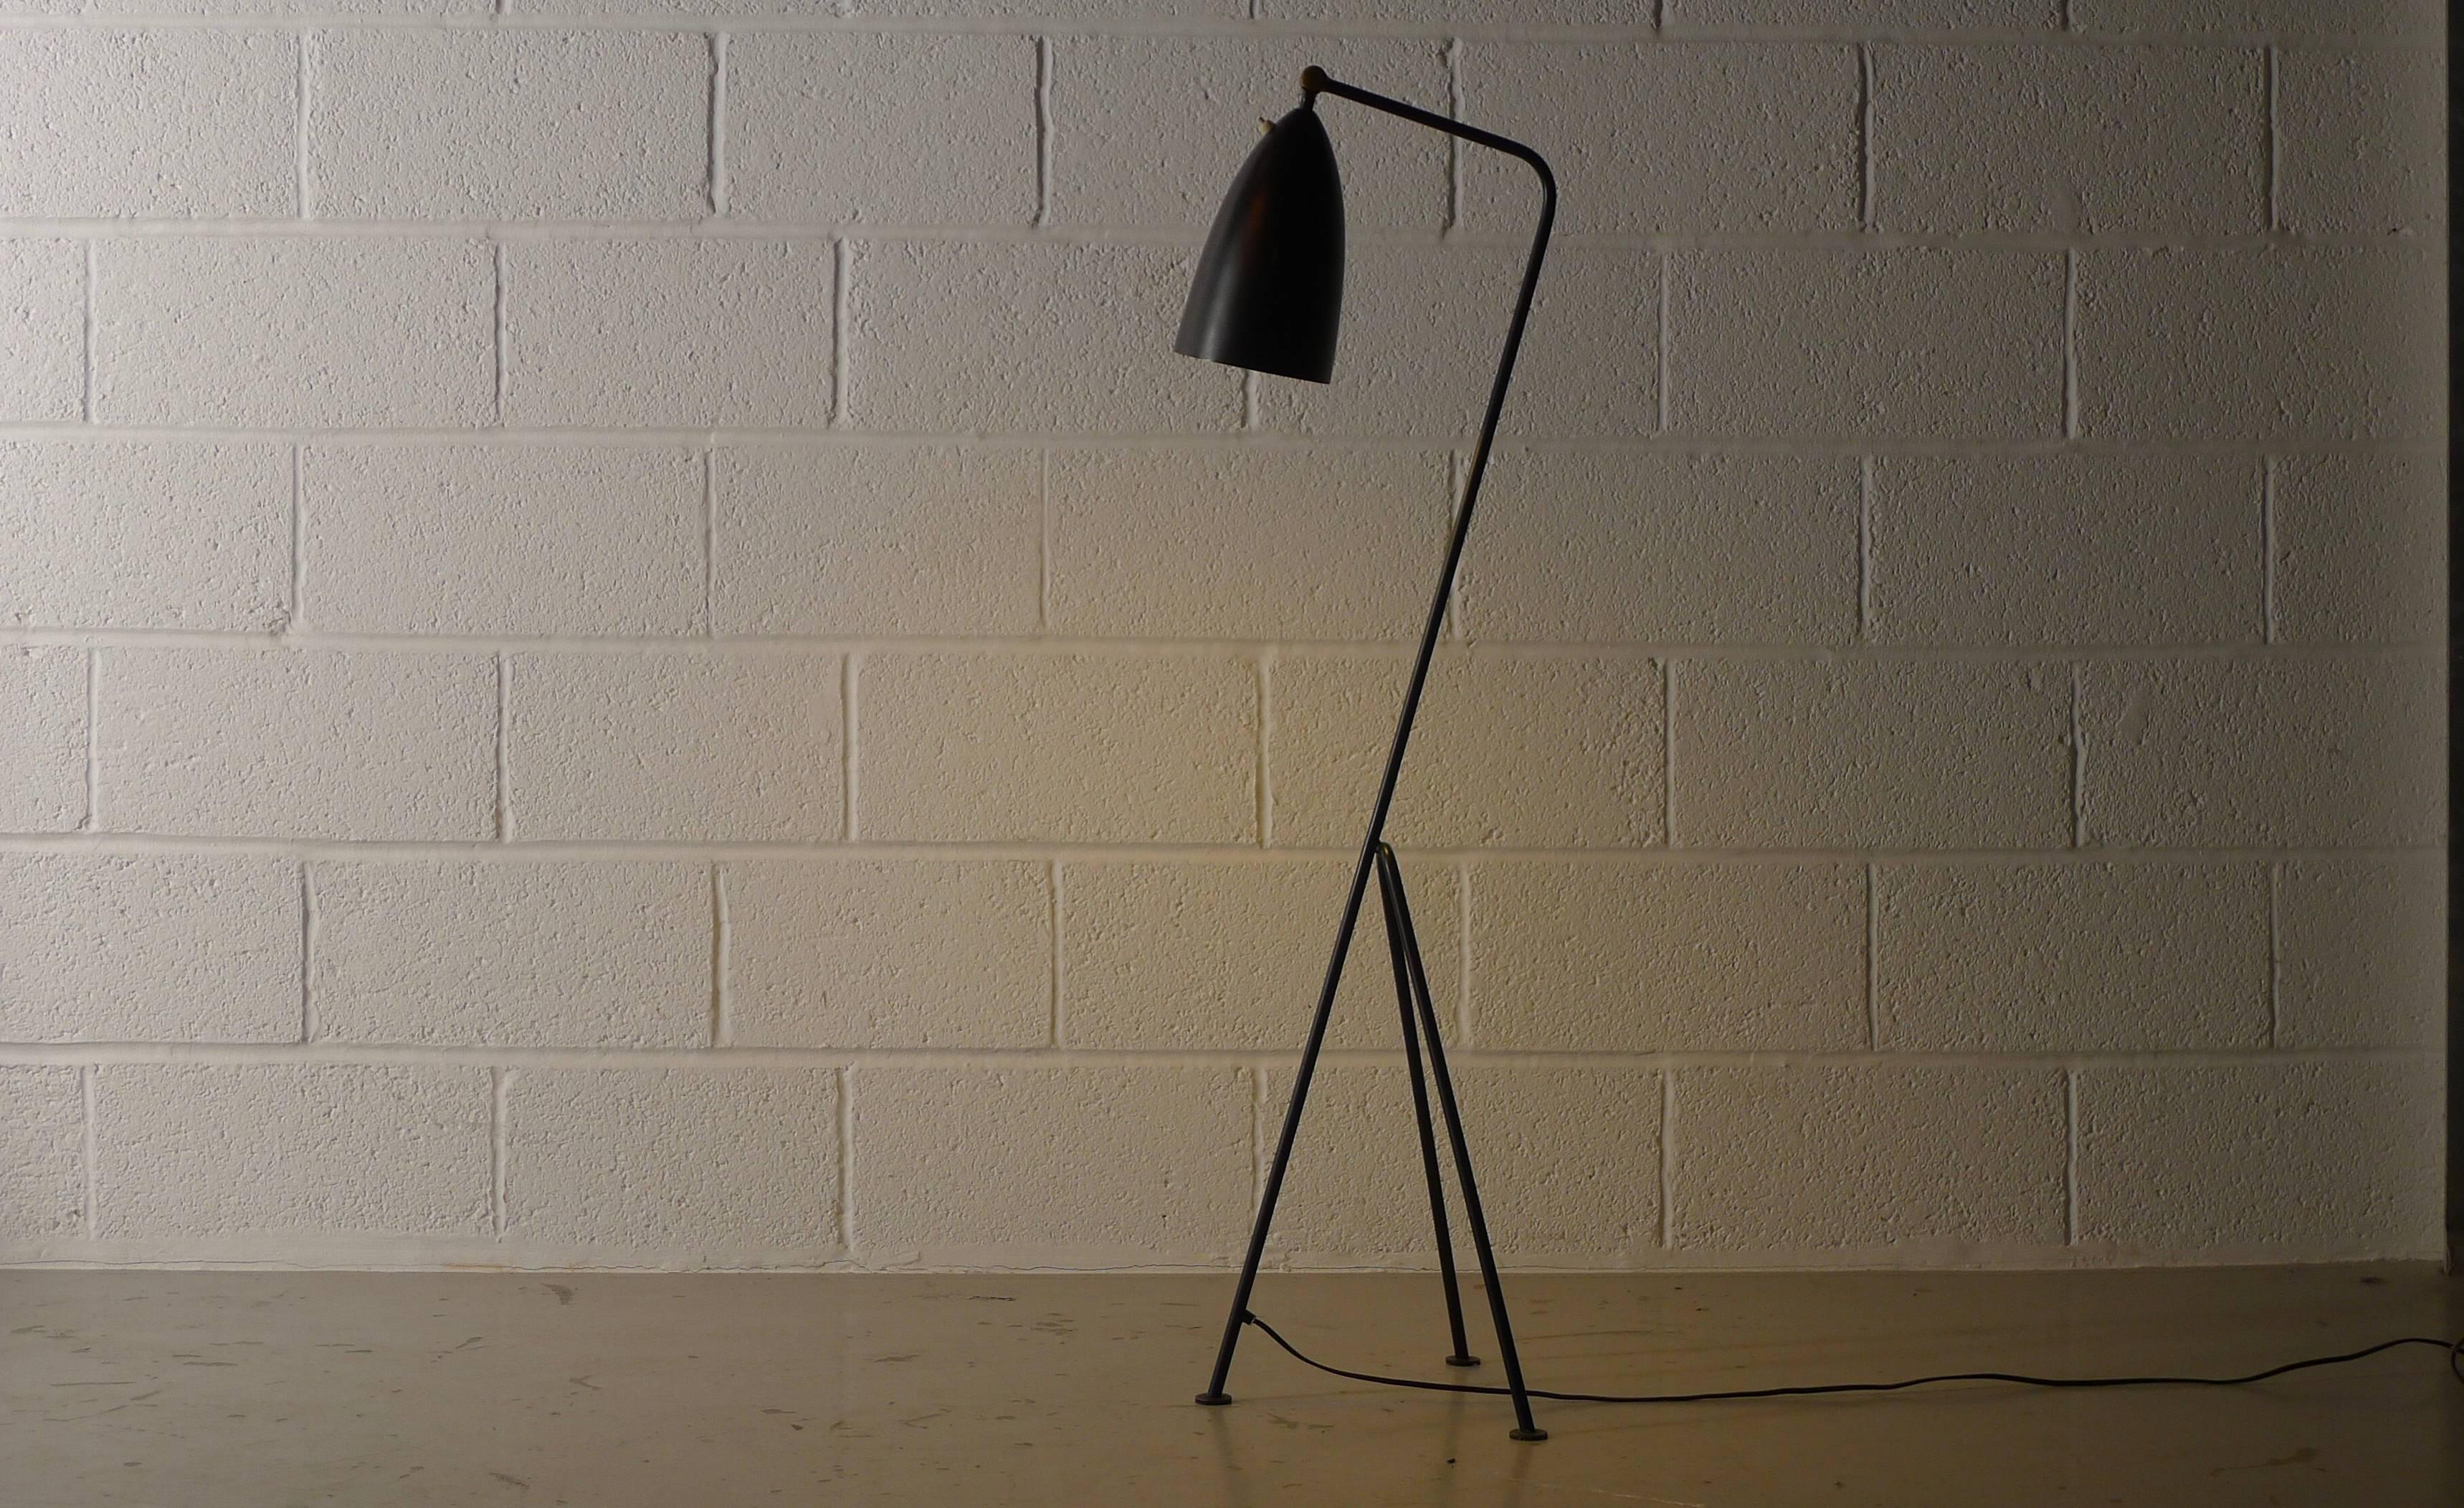 Greta Magnusson-Grossman for Bergboms, Malmo, Sweden. Model G-33 floor lamp with adjustable conical shade on tripod base, black enameled steel and brass fittings.

Good original condition with label.